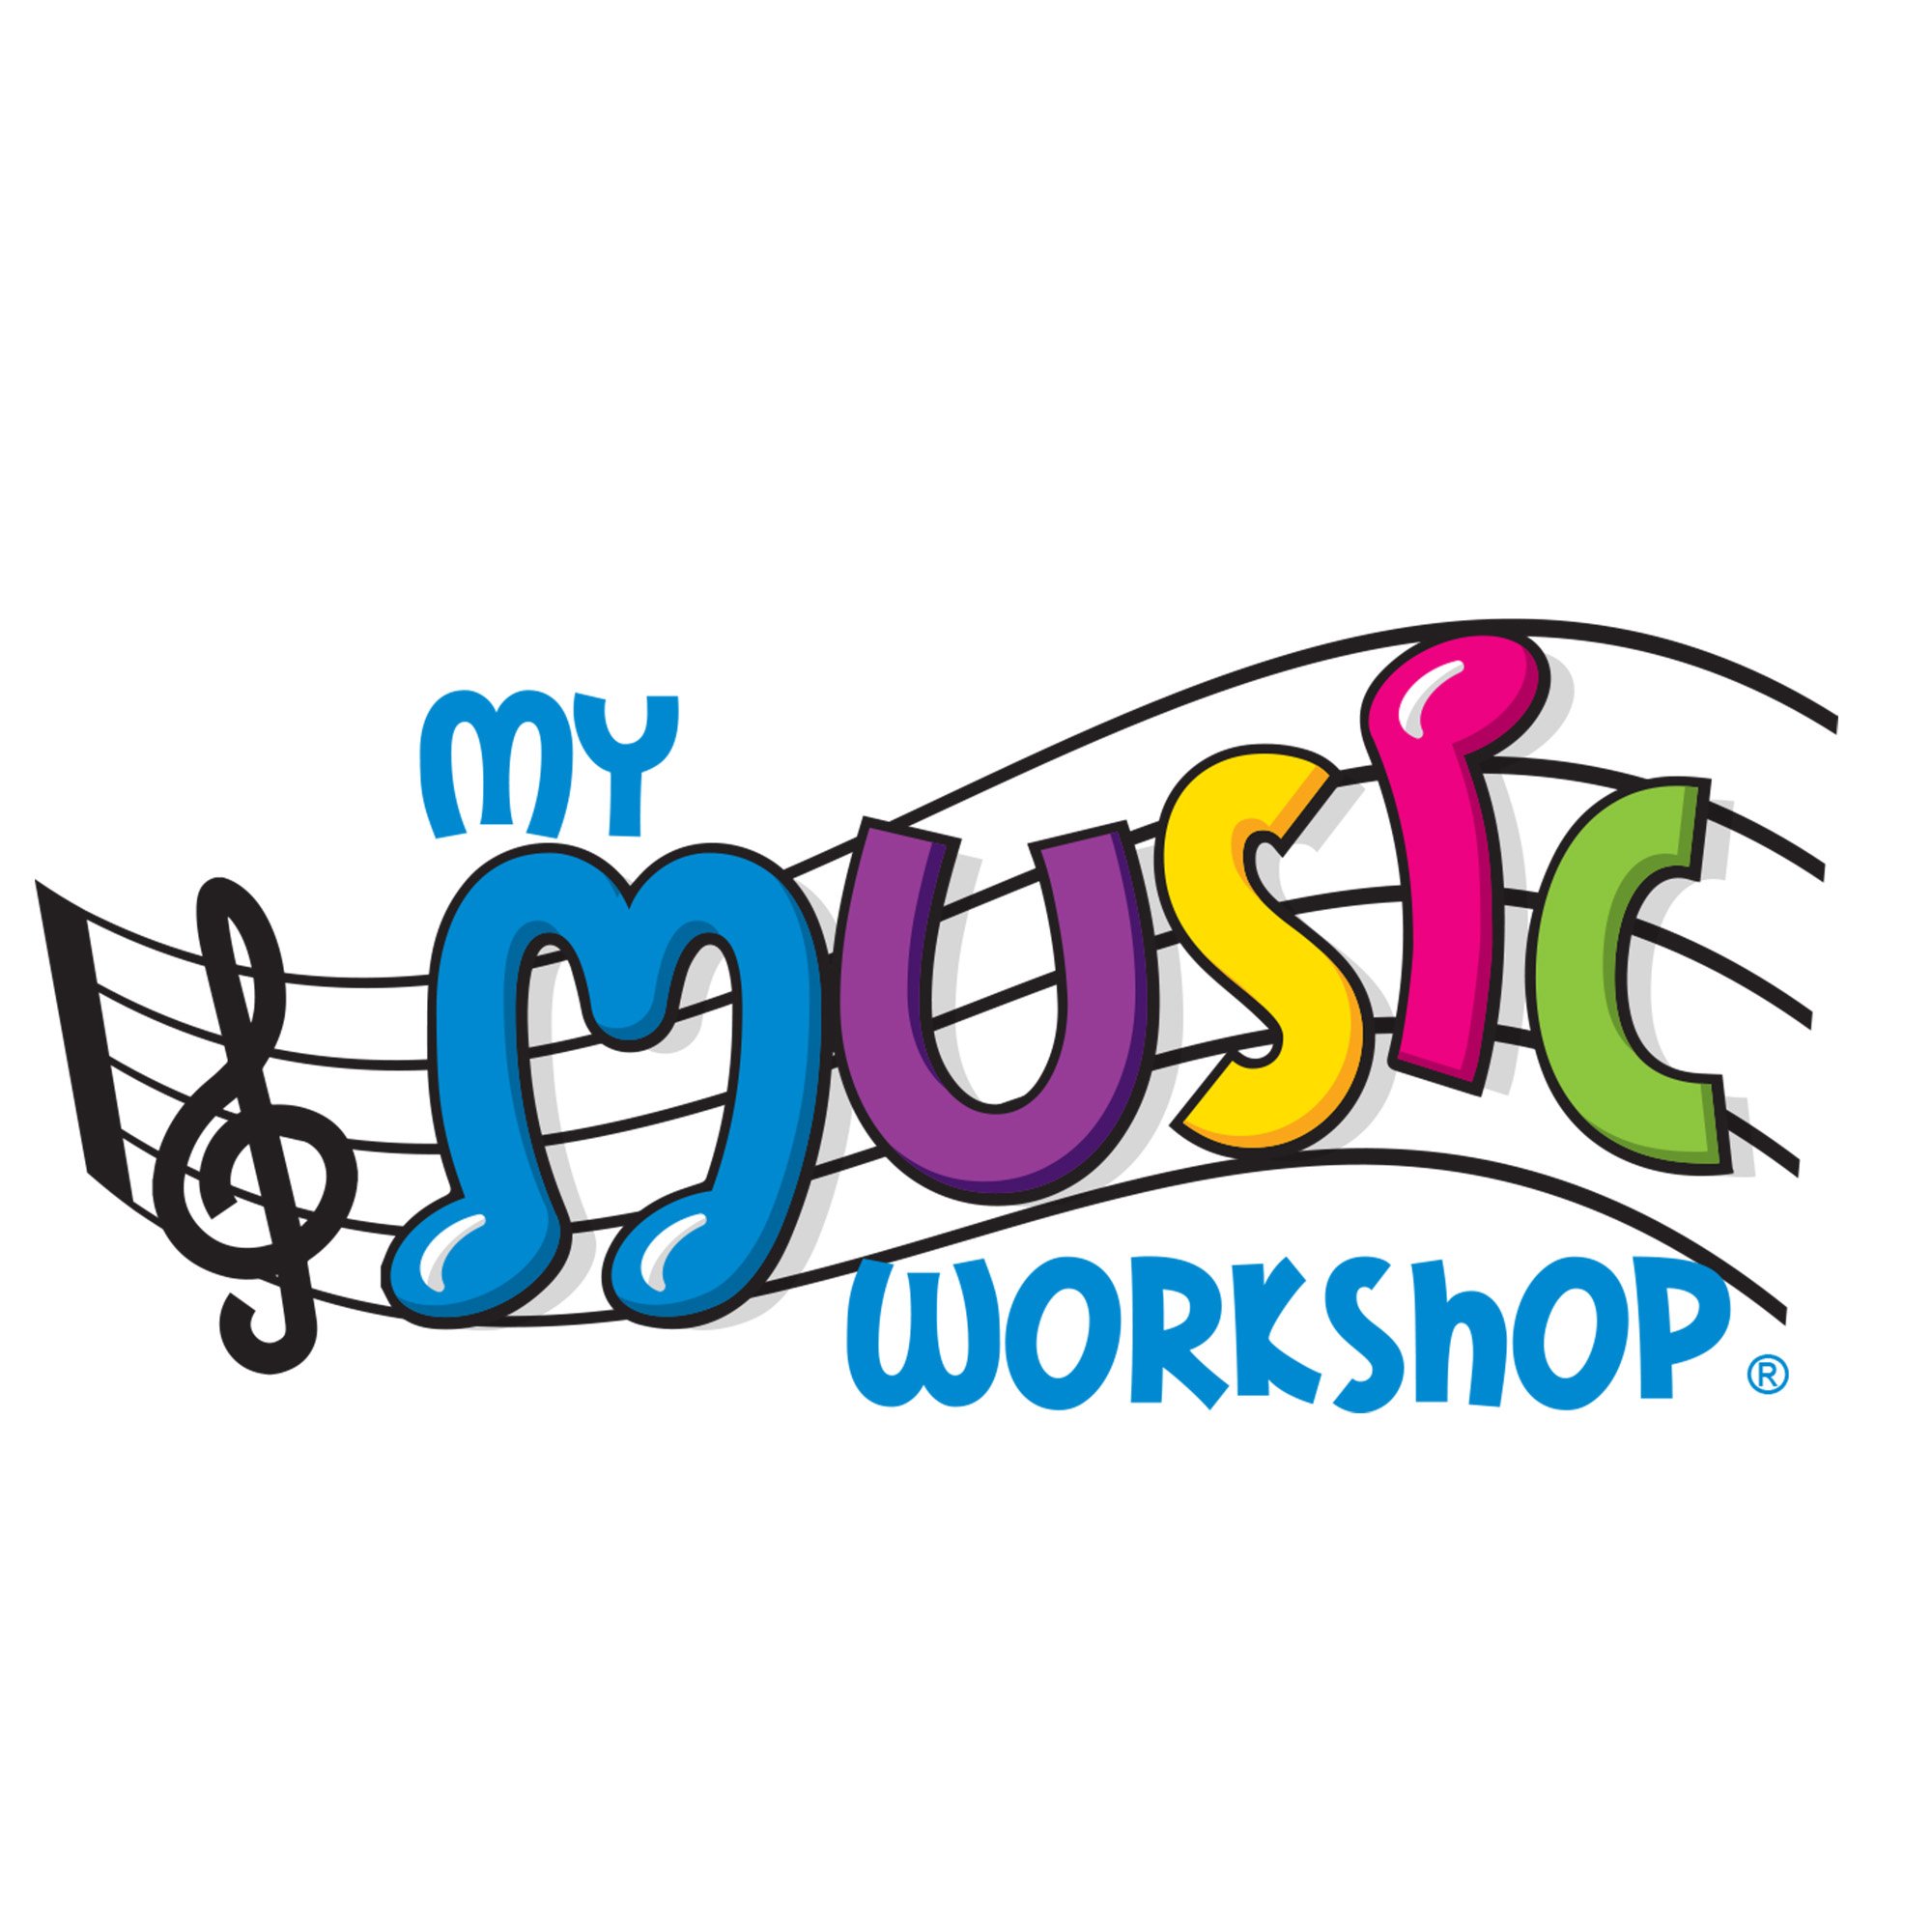 Learning music has never been this fun! My Music Workshop is a children's music education program. We offer franchises to those who love kids and music!